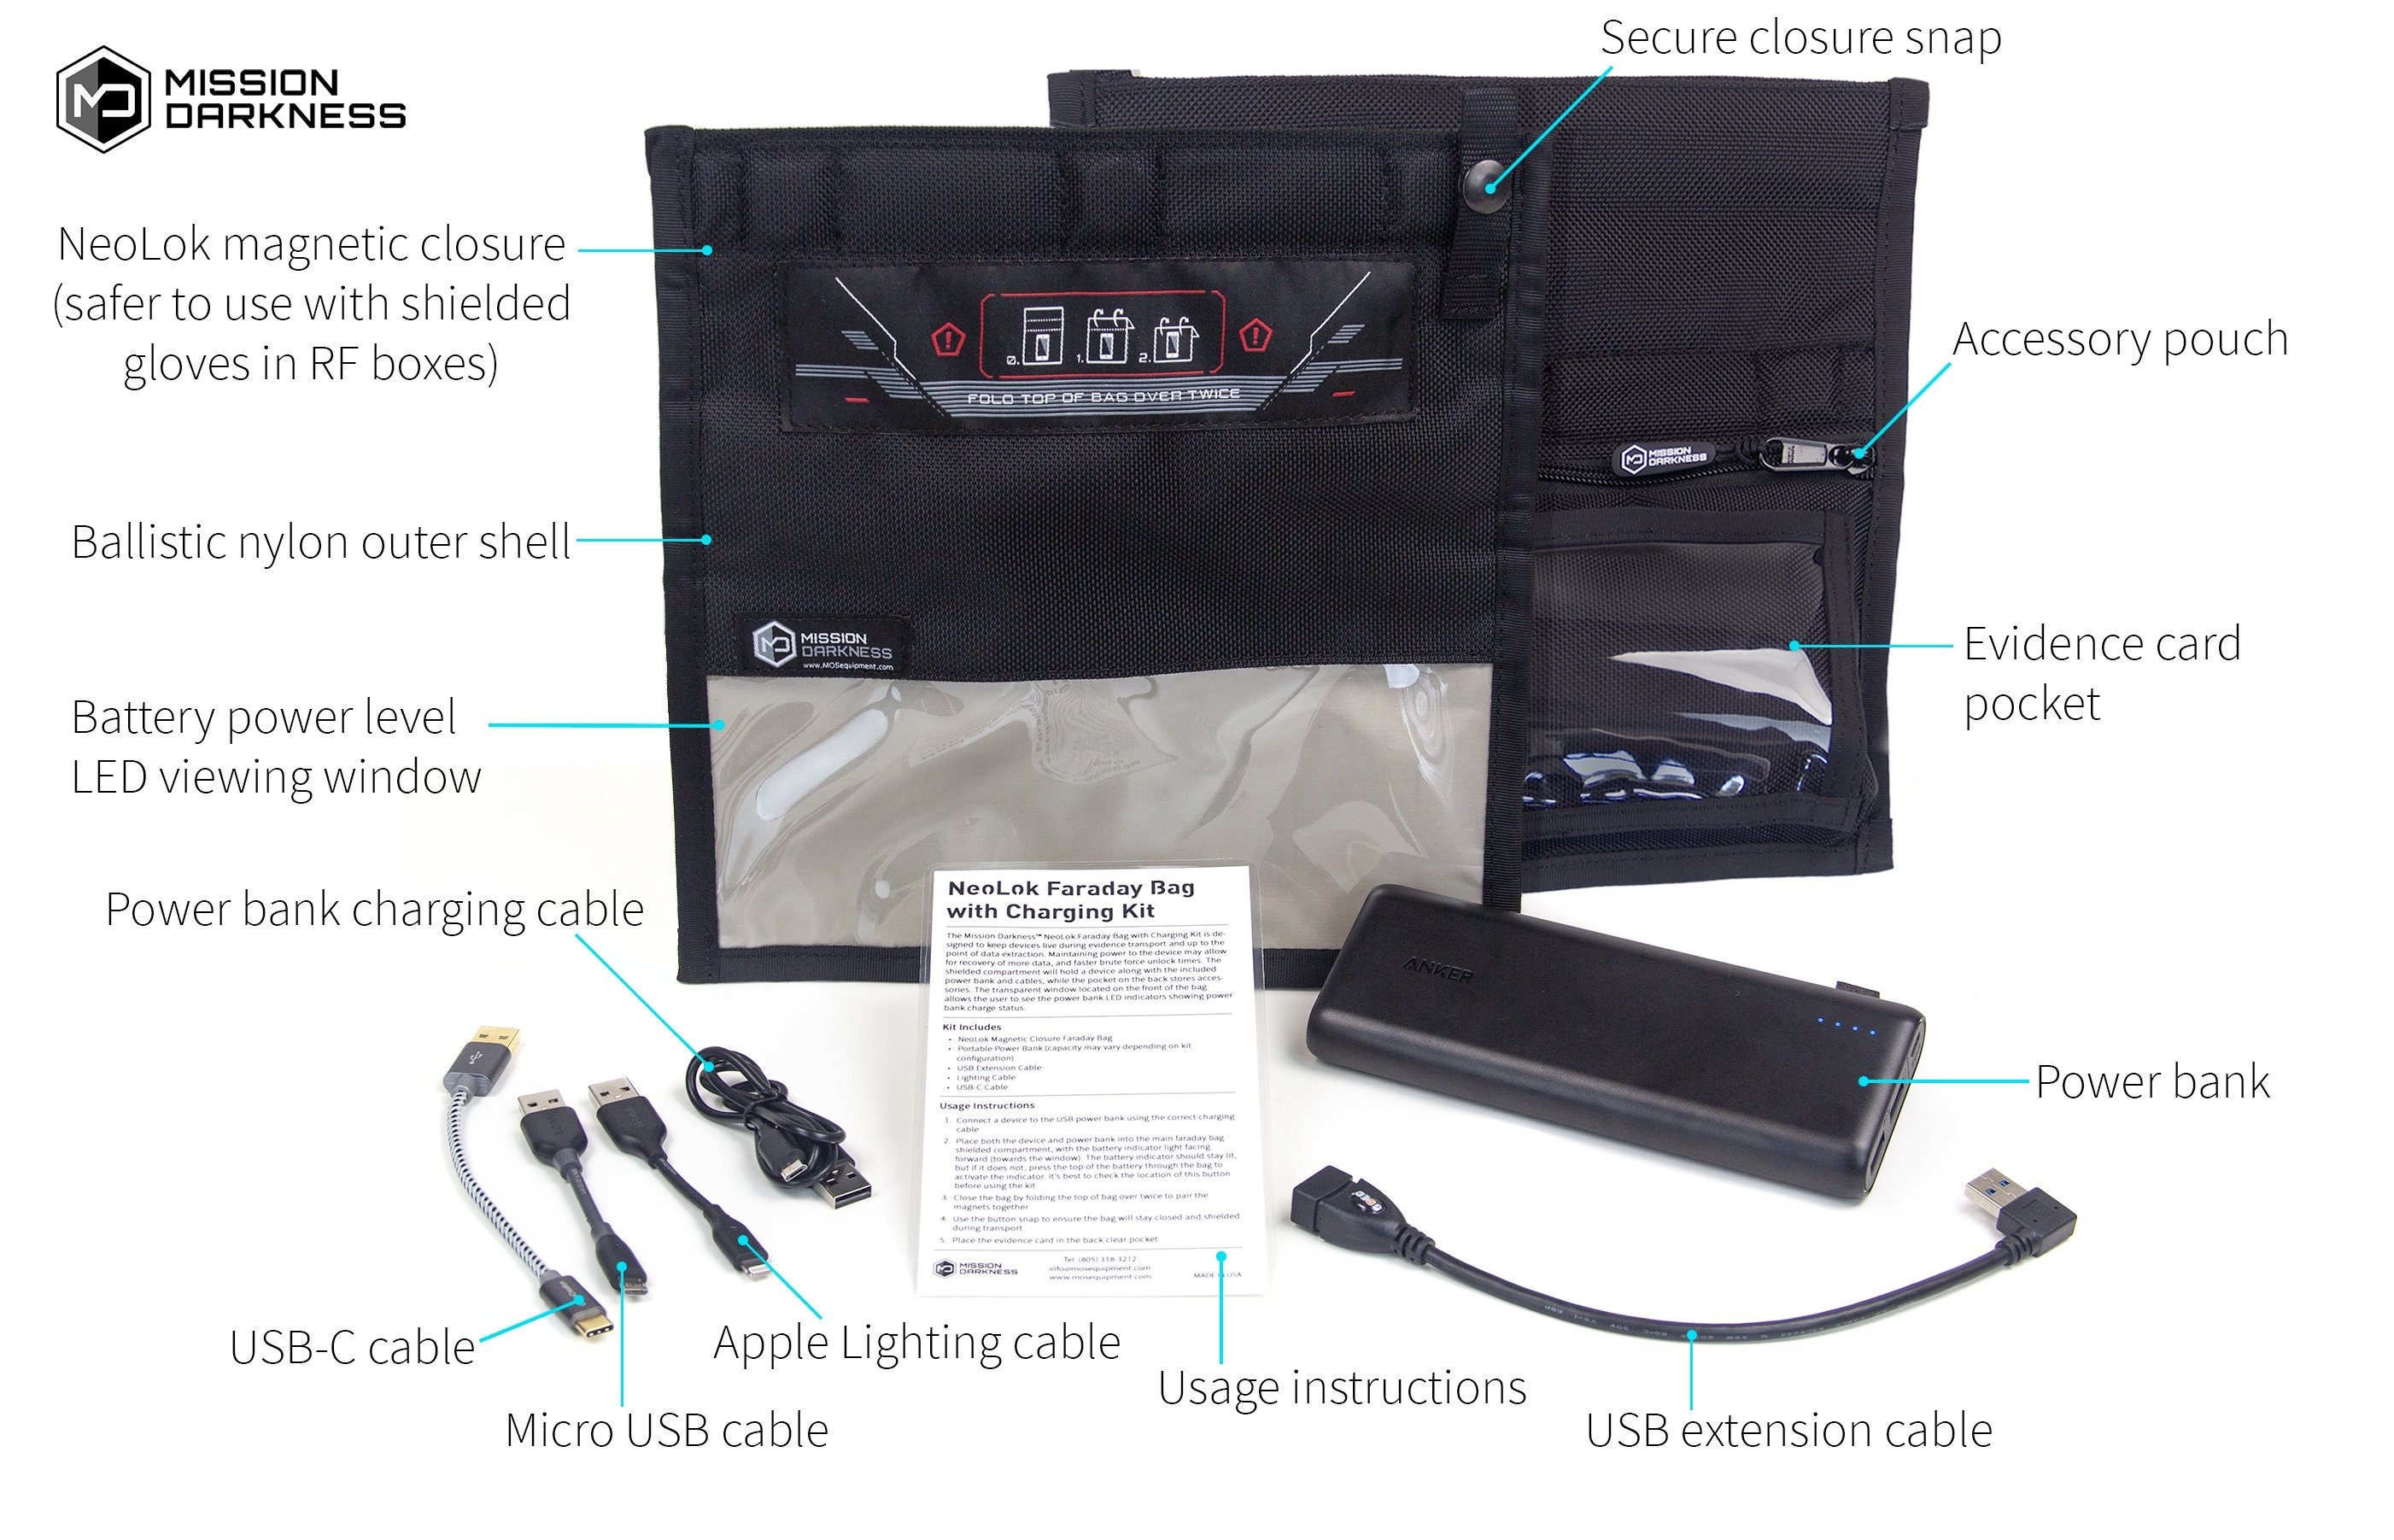 MISSION DARKNESS™ NEOLOK FARADAY BAG FOR TABLETS WITH BATTERY KIT